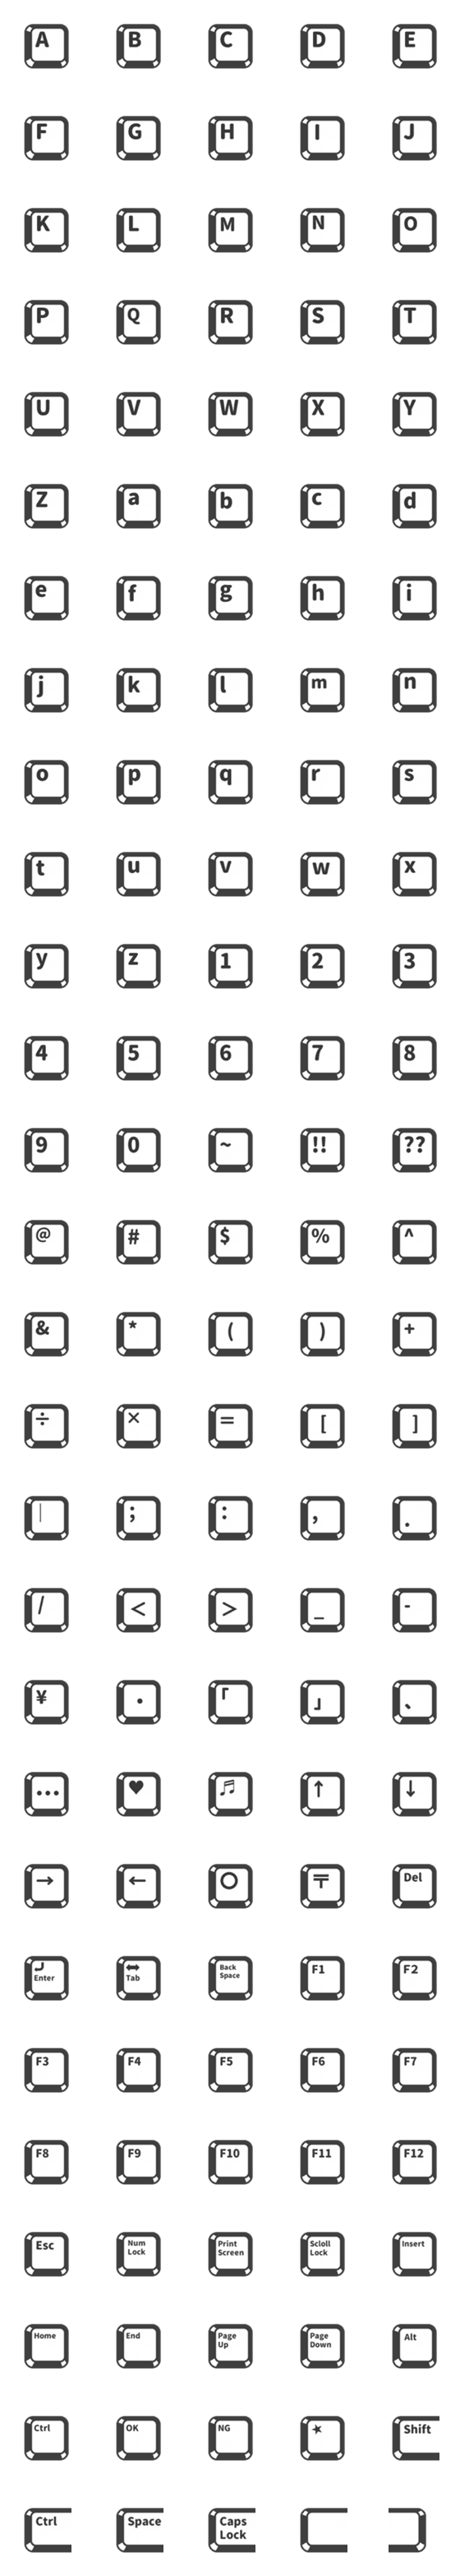 [LINE絵文字]Keyboard(キーボード) Accessoryの画像一覧